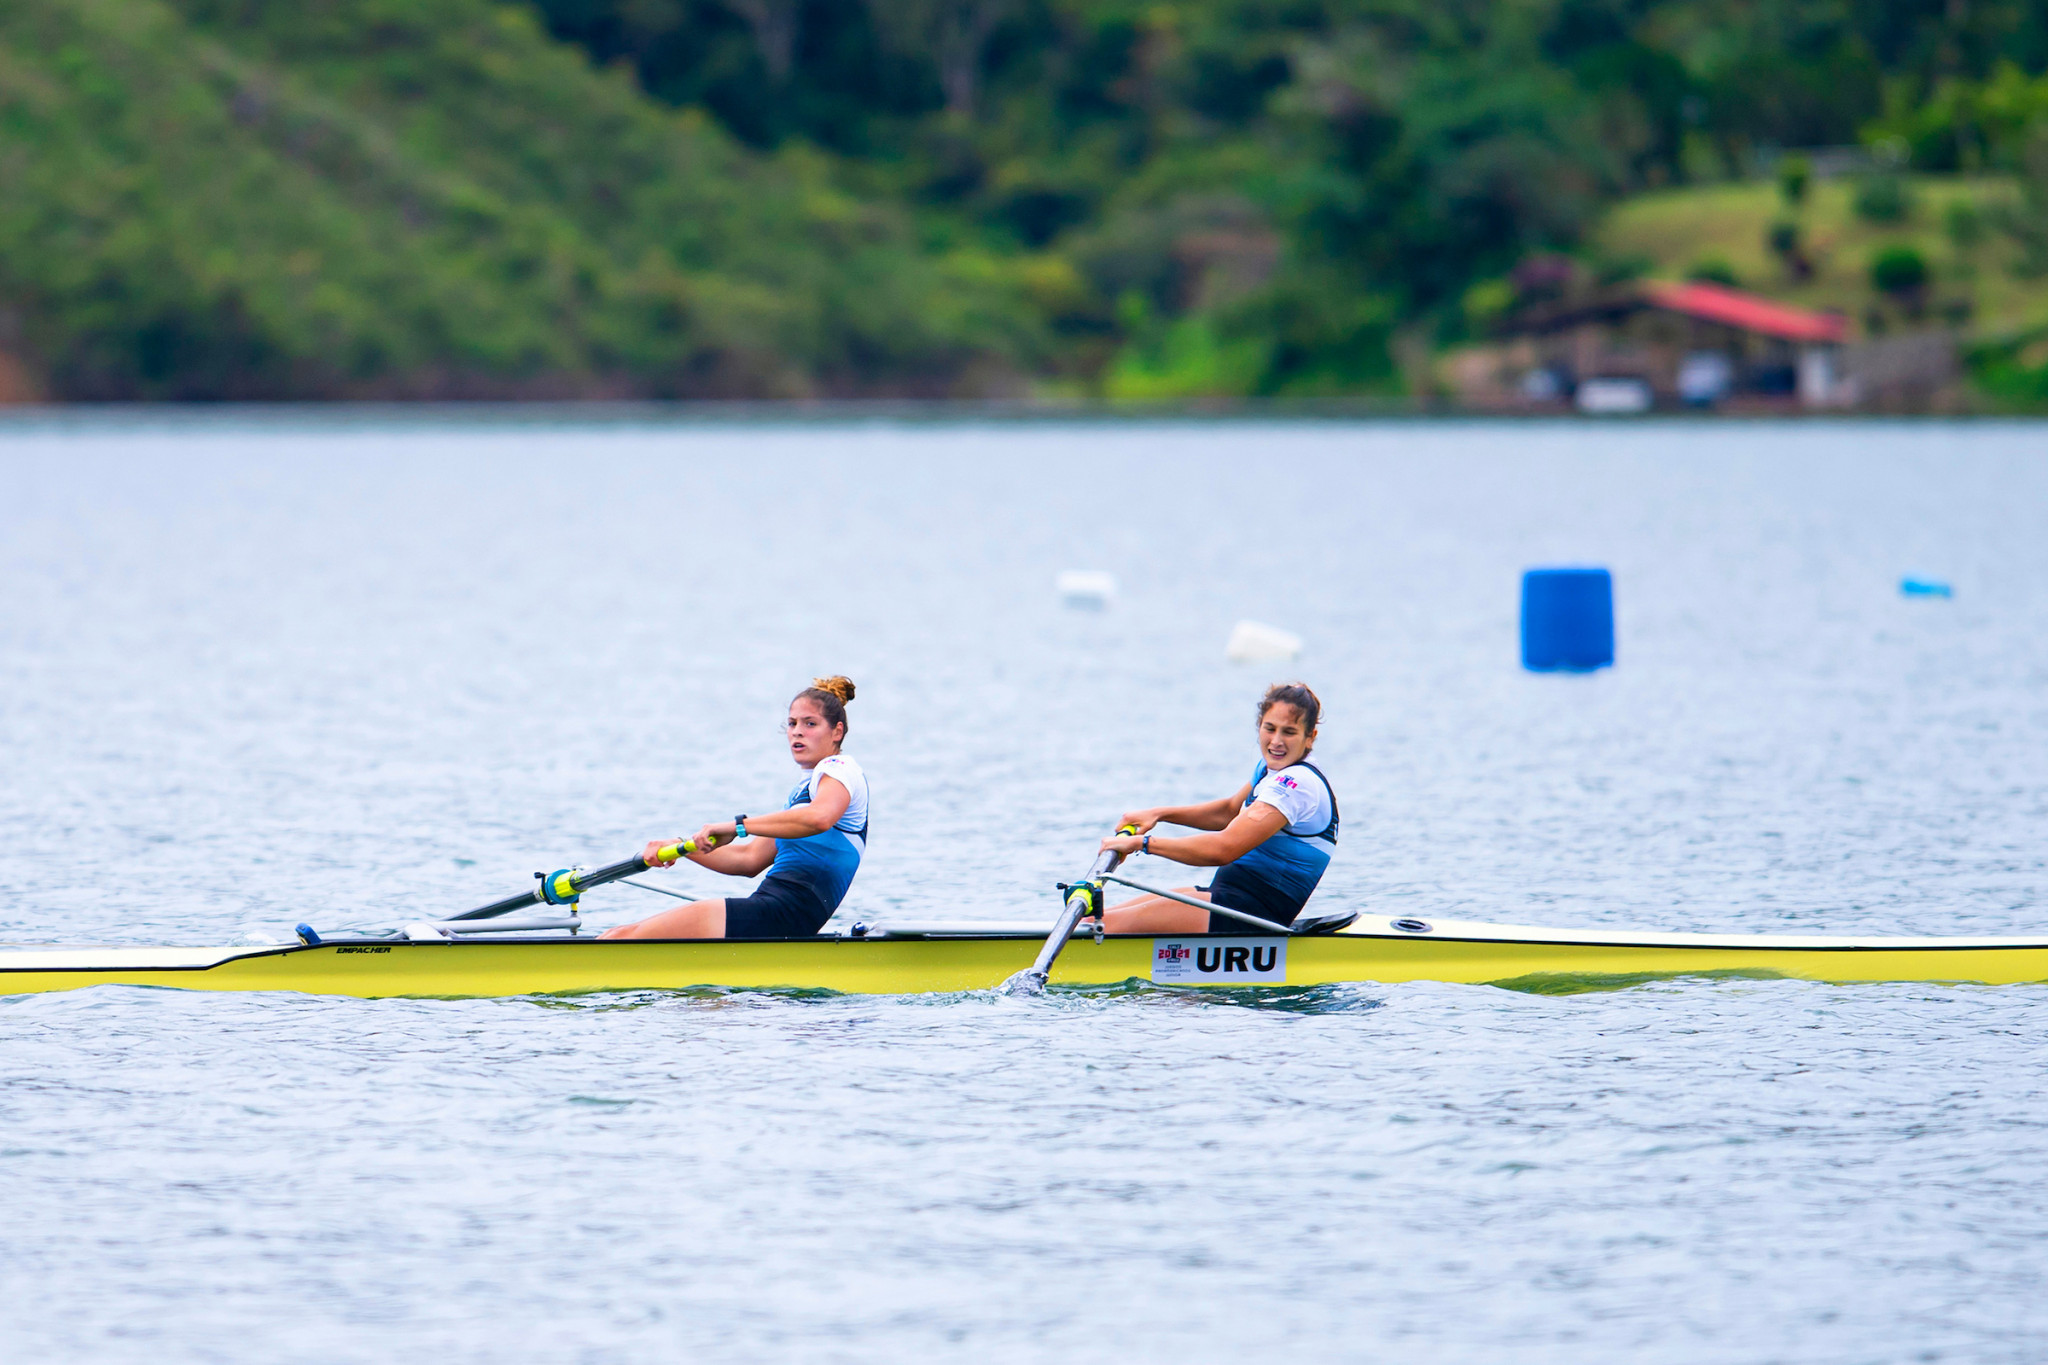 Uruguay won two gold medals in today's rowing events on Lake Calima - in the women's coxless pair and the men's coxless quad ©Agencia.Xpress Media